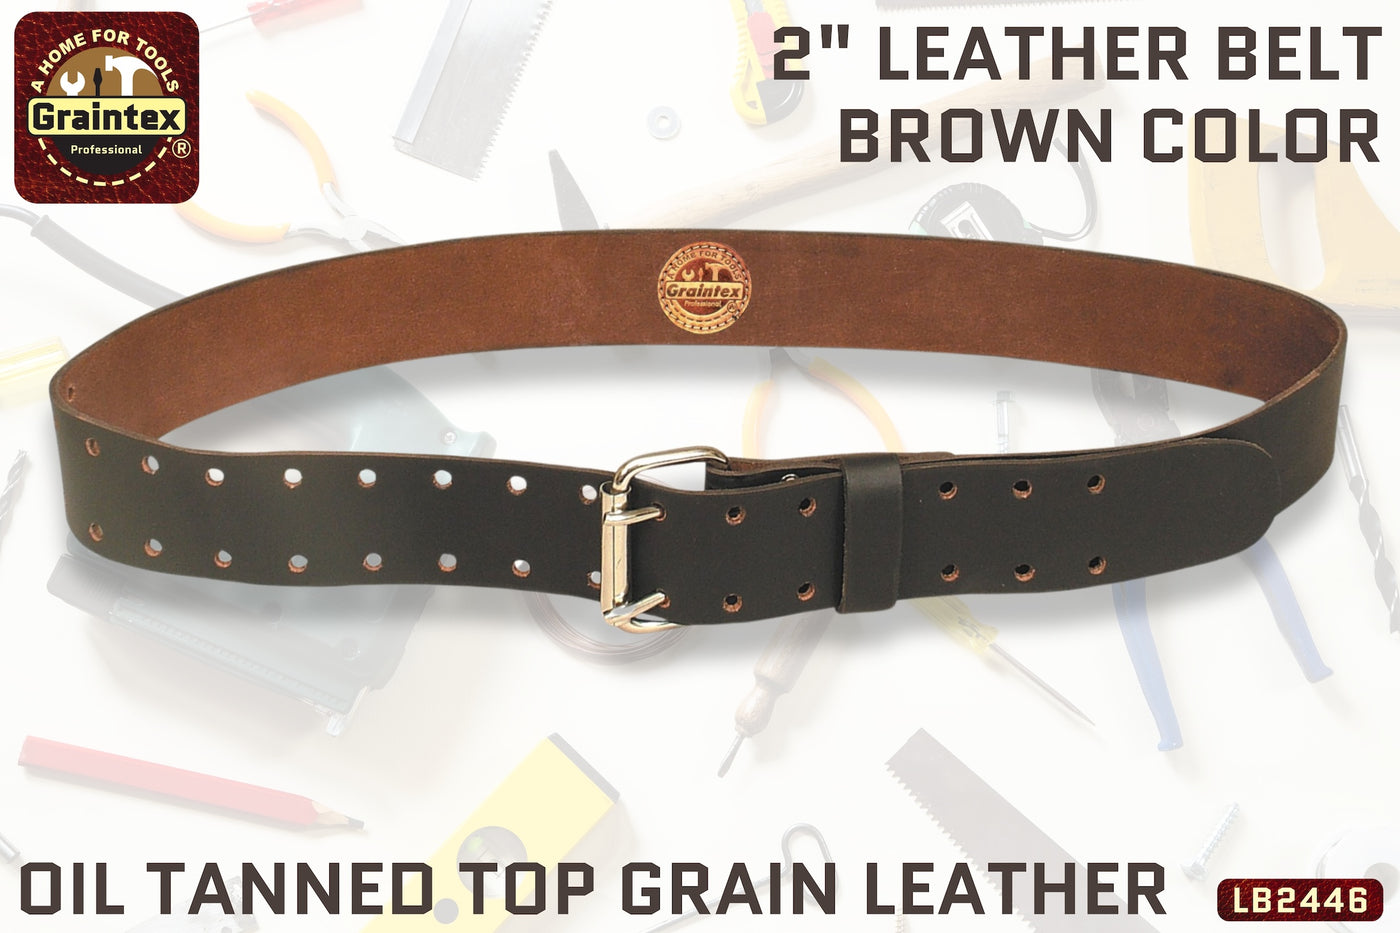 LB2446 :: 2” LEATHER BELT BROWN COLOR OIL TANNED LEATHER